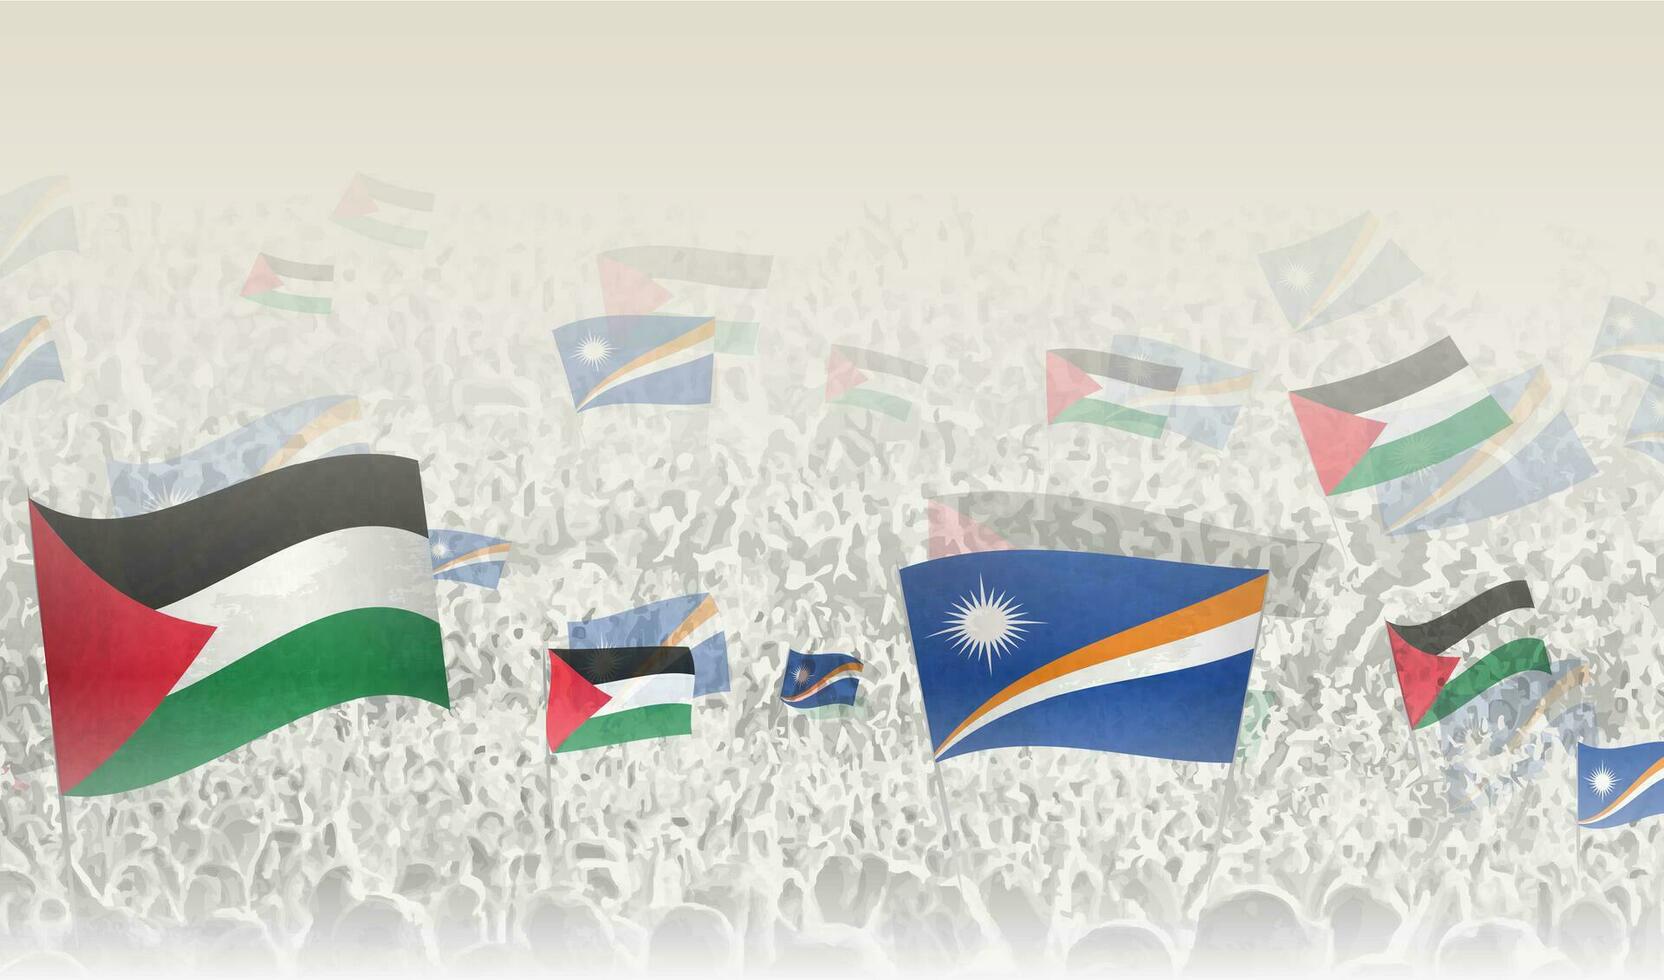 Palestine and Marshall Islands flags in a crowd of cheering people. vector